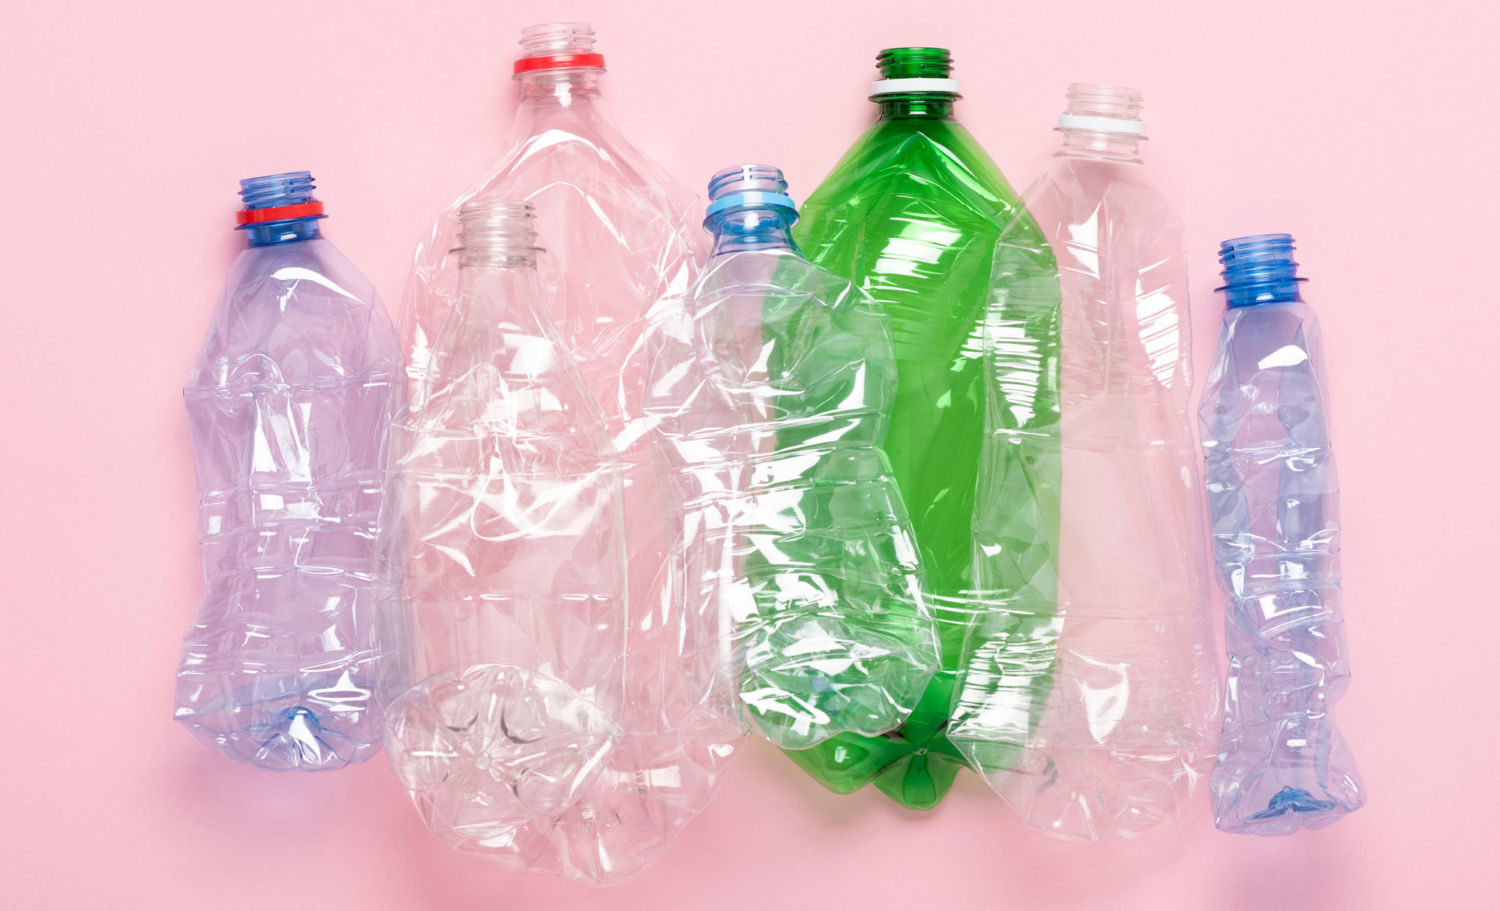 Why we should not reuse plastic water bottles - 360